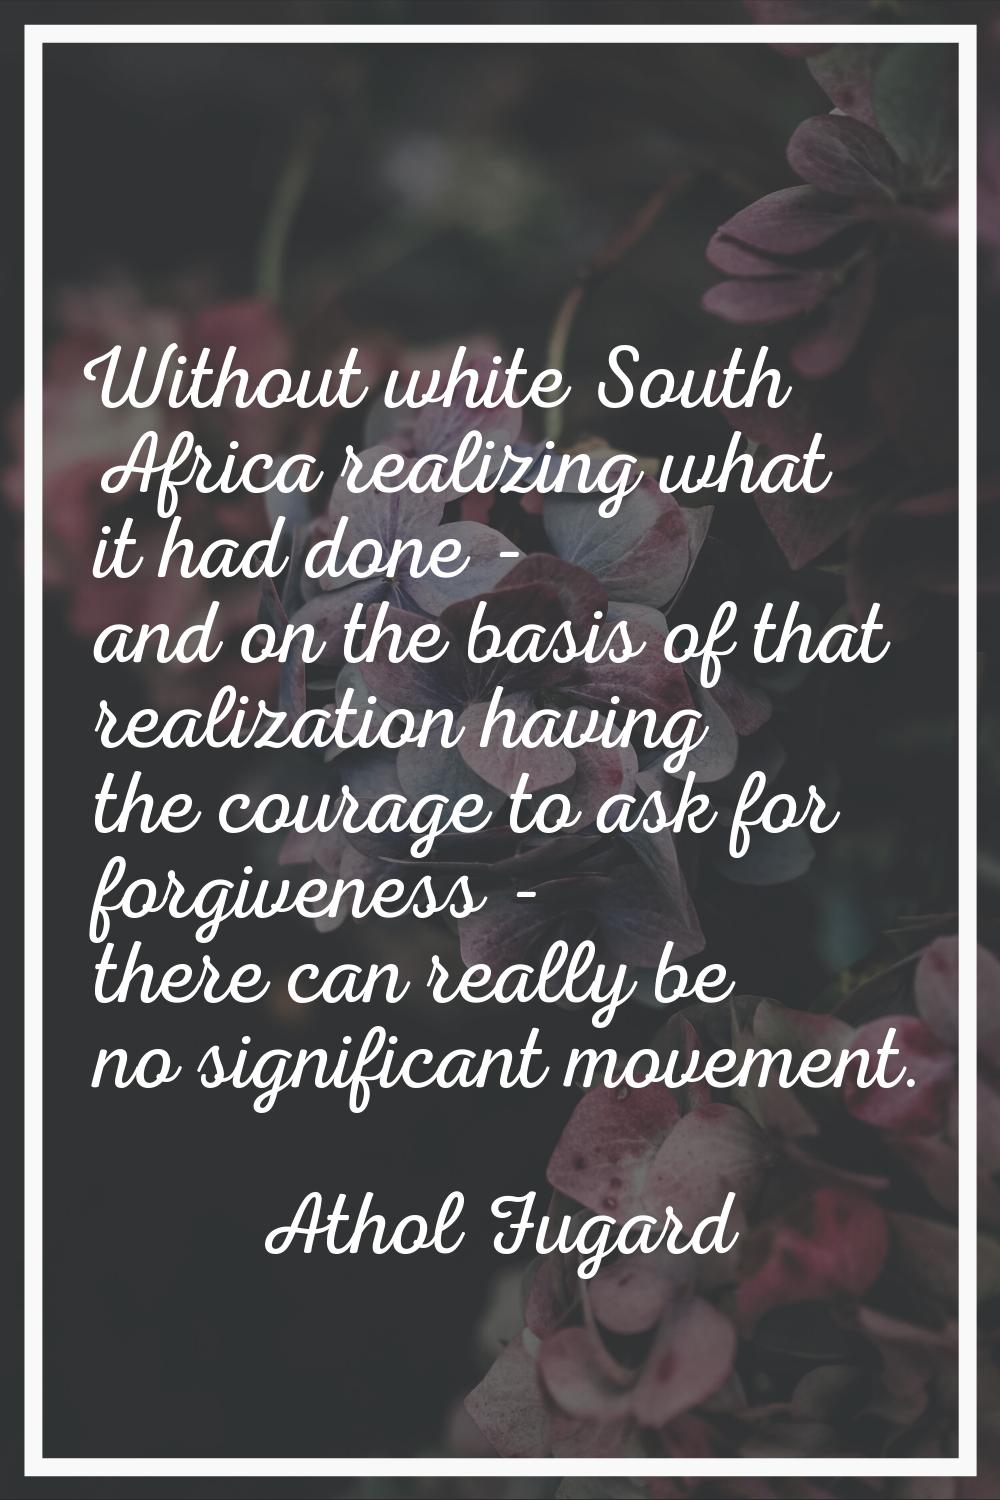 Without white South Africa realizing what it had done - and on the basis of that realization having